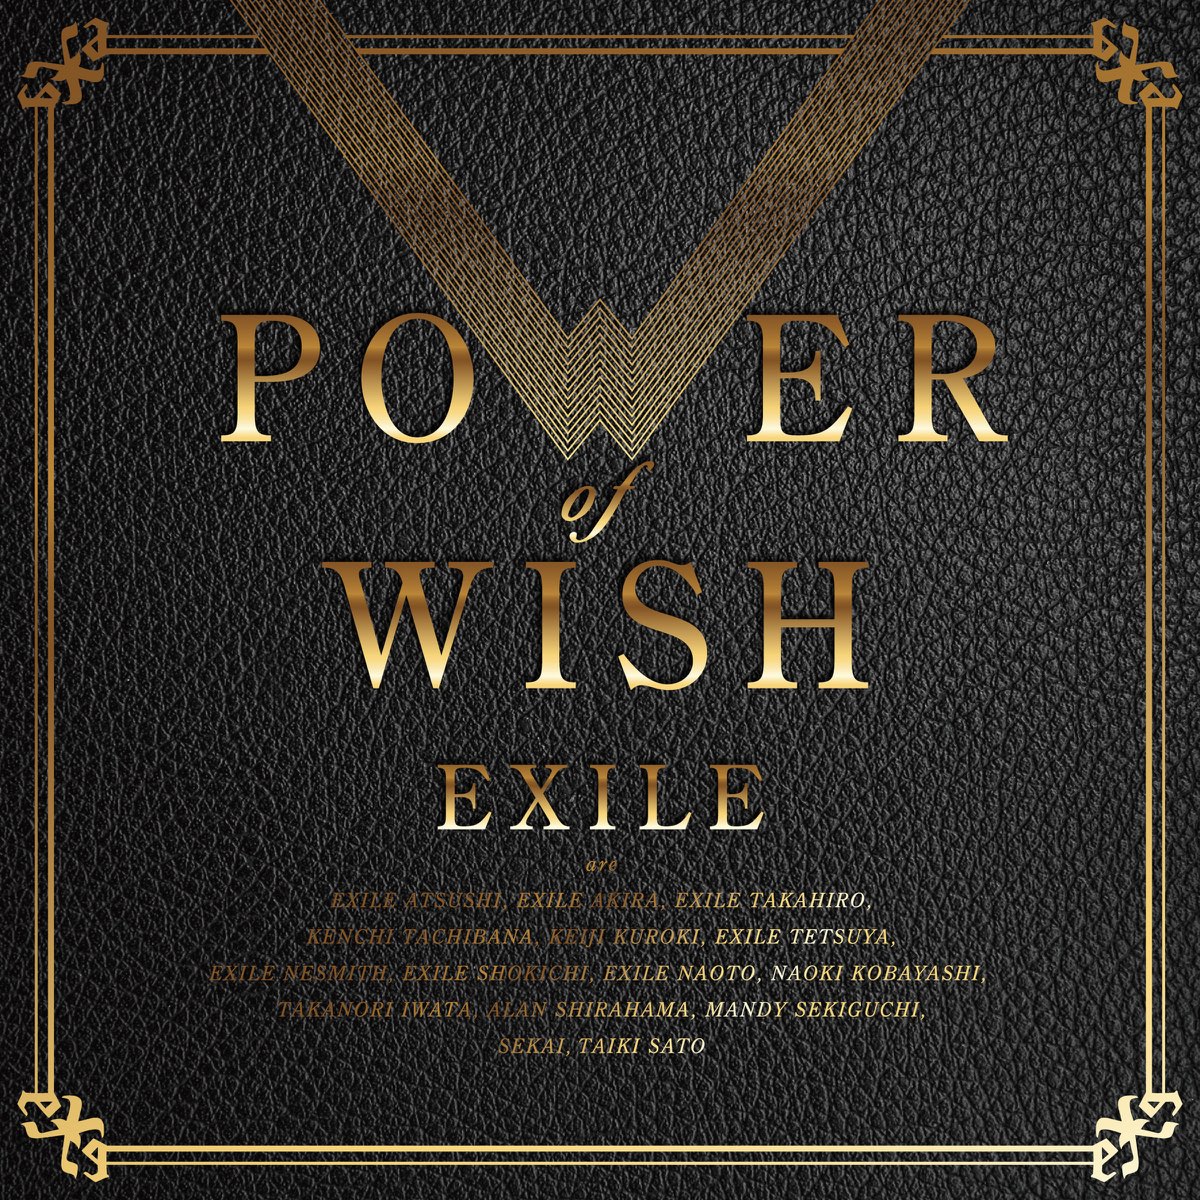 POWER OF WISH - Album by EXILE - Apple Music